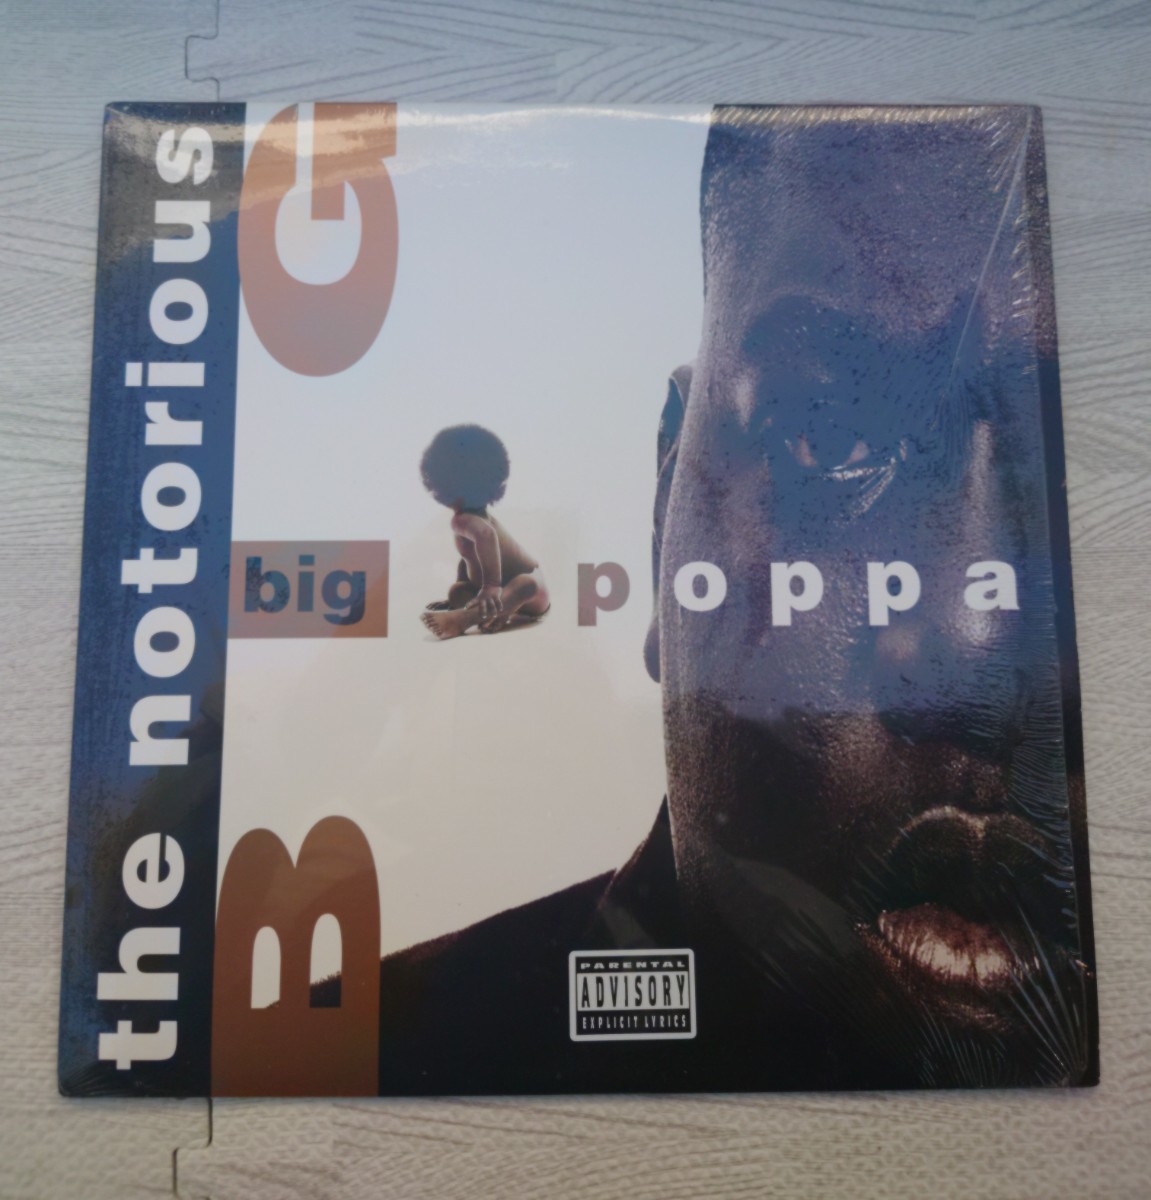 big poppa / the notorious LP record Bick popa notorious 